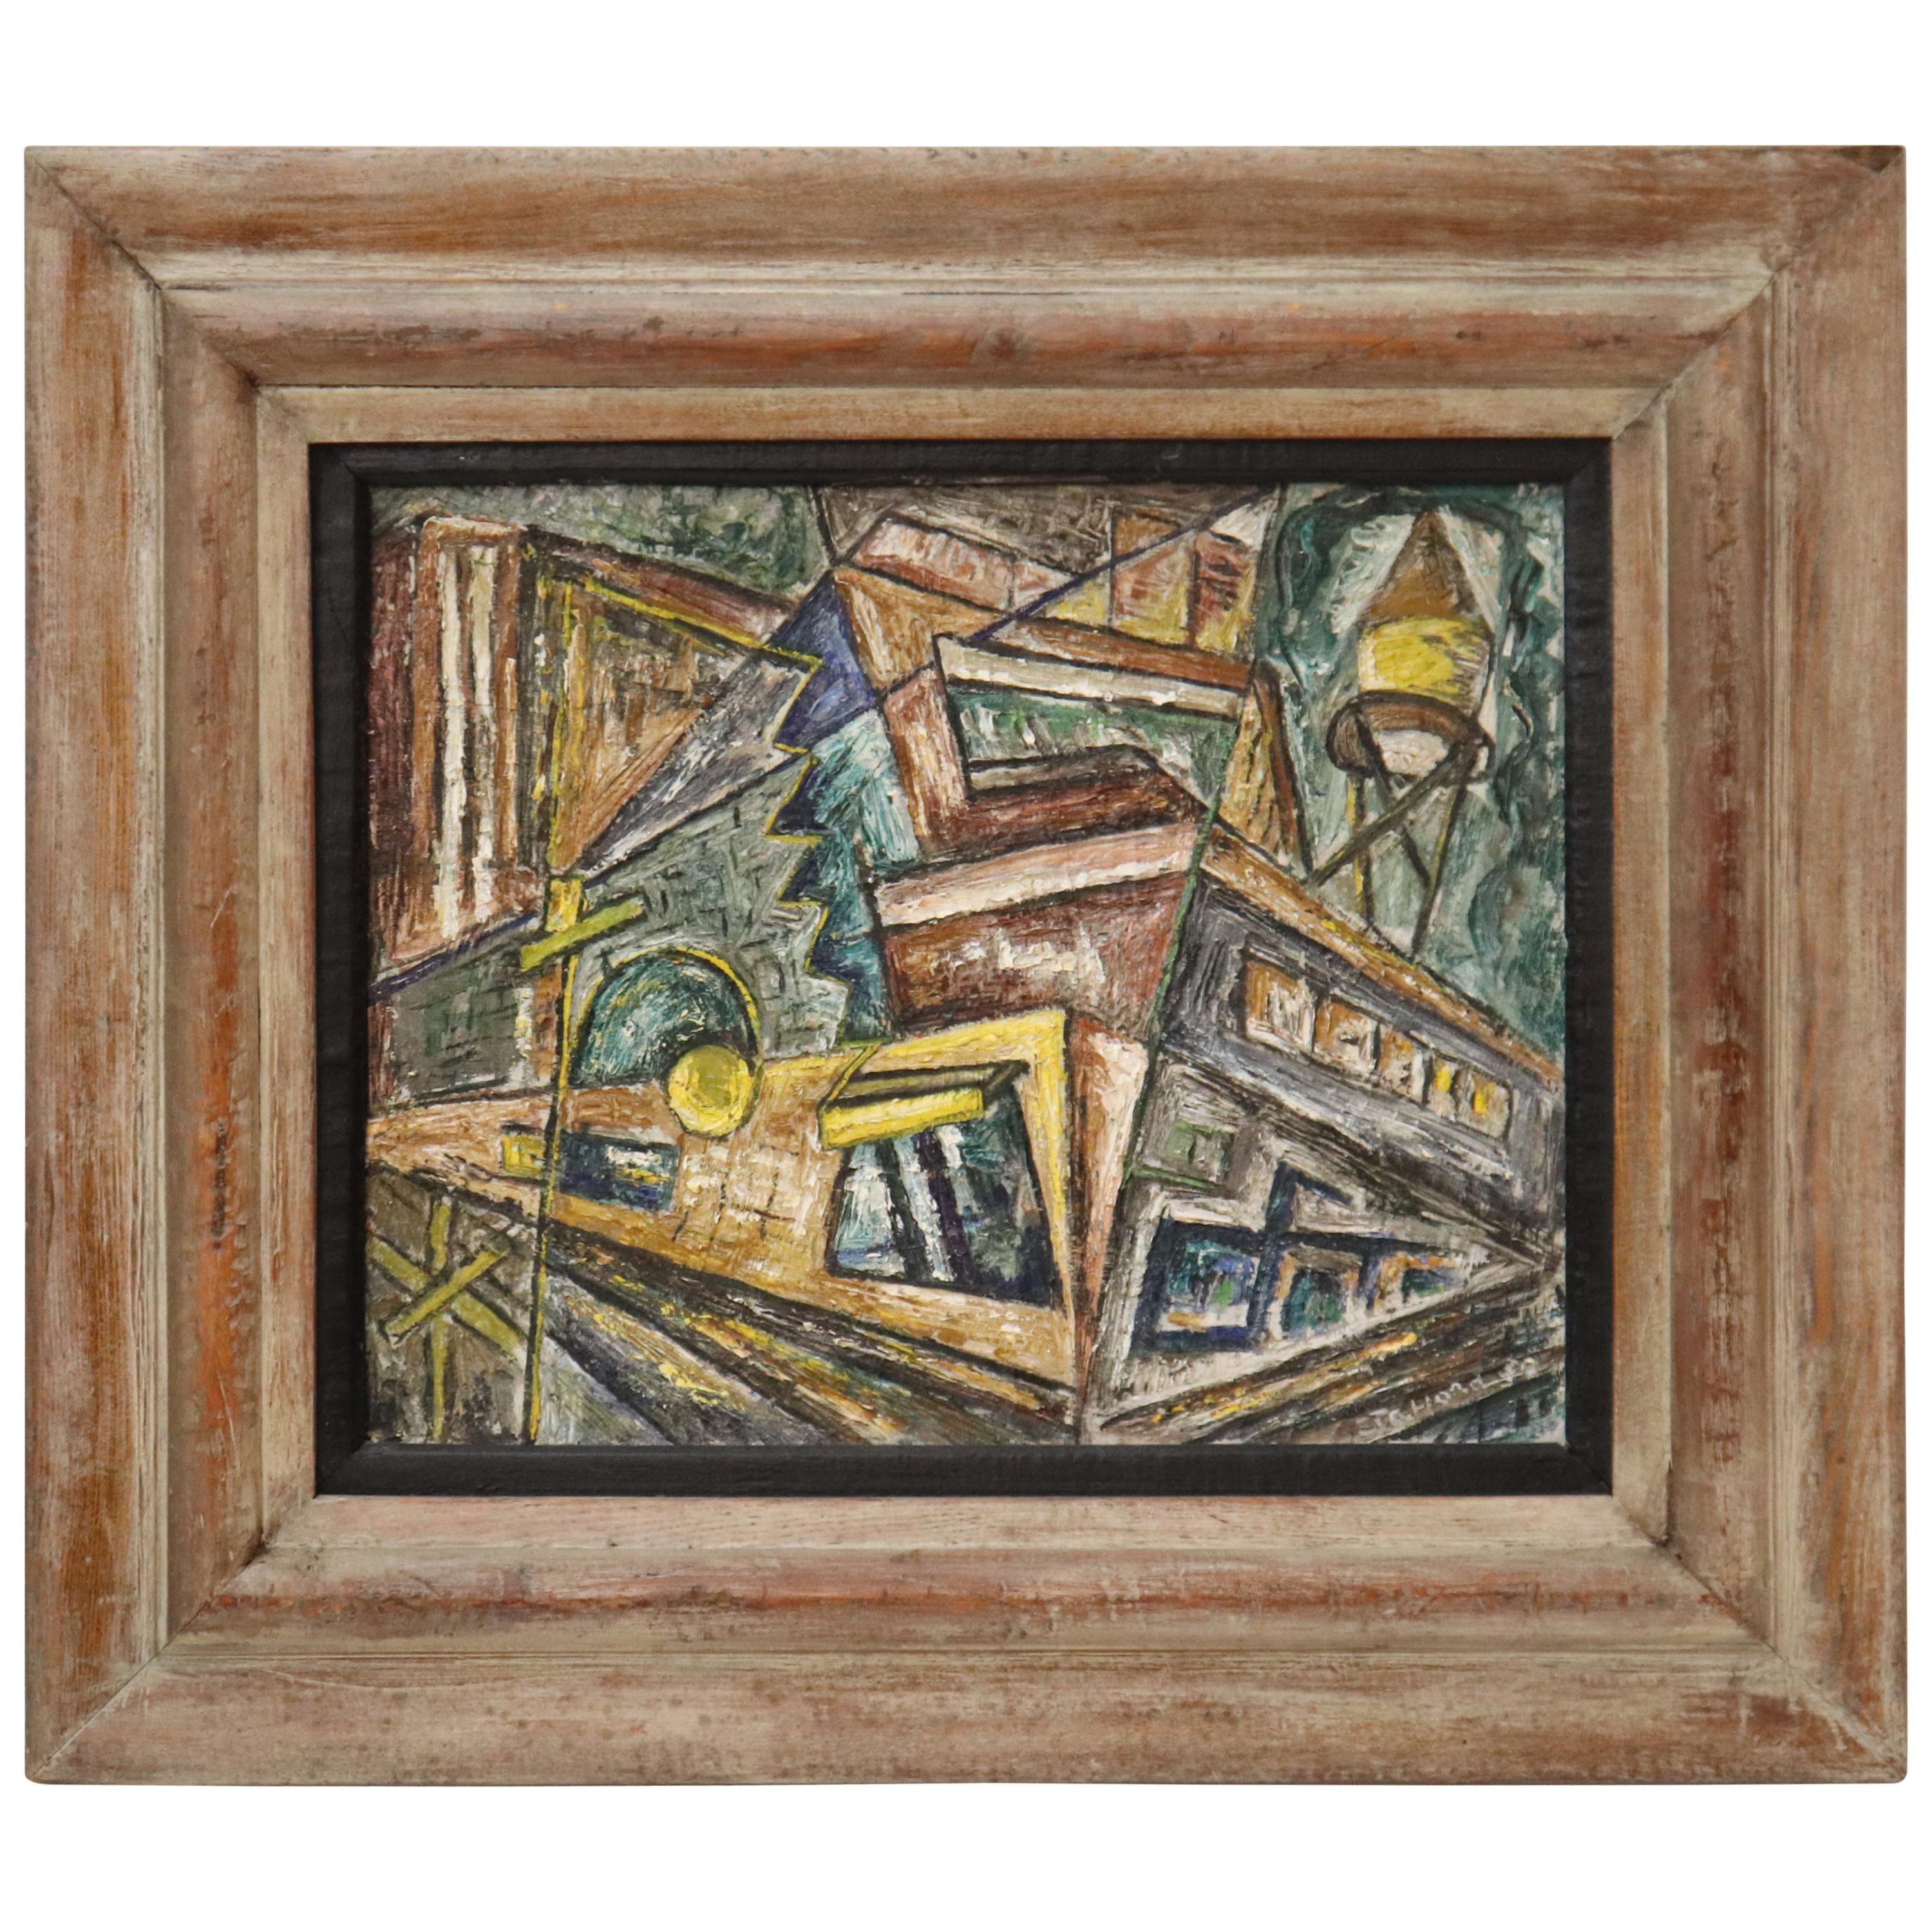 Dorothy Stafford "Factory Corner" American Cubist Oil on Canvas Painting